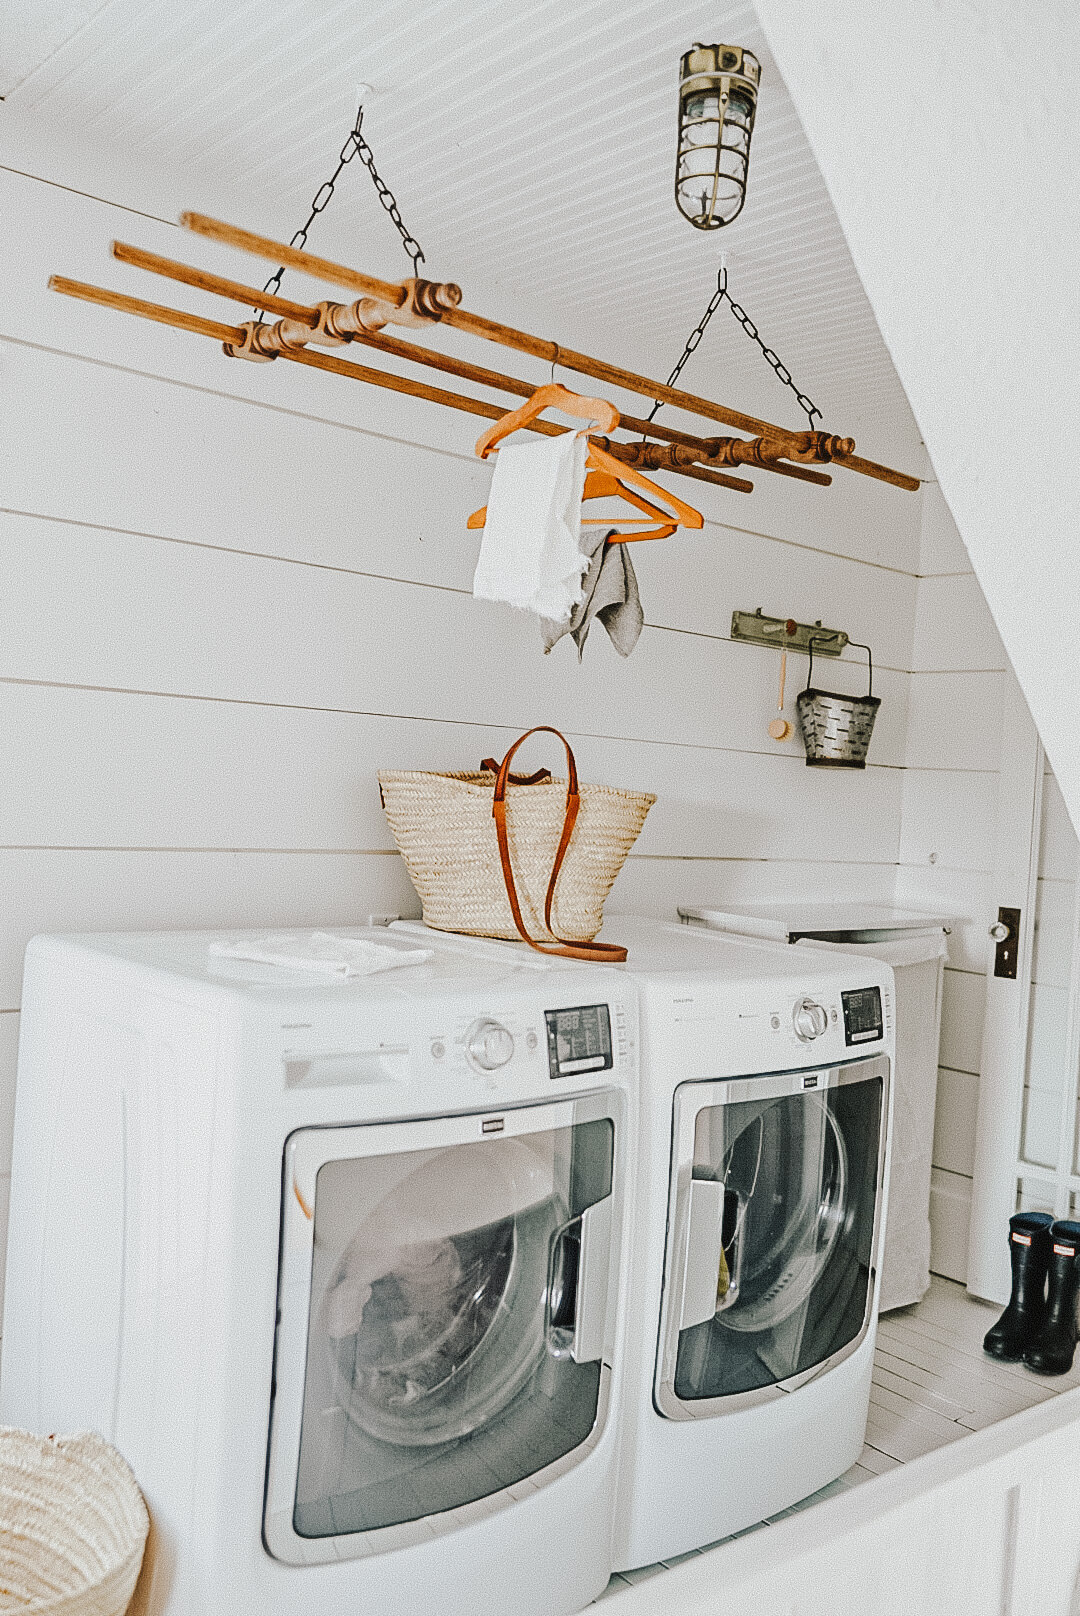 How to Make a DIY Ceiling Mounted Clothes Drying Rack